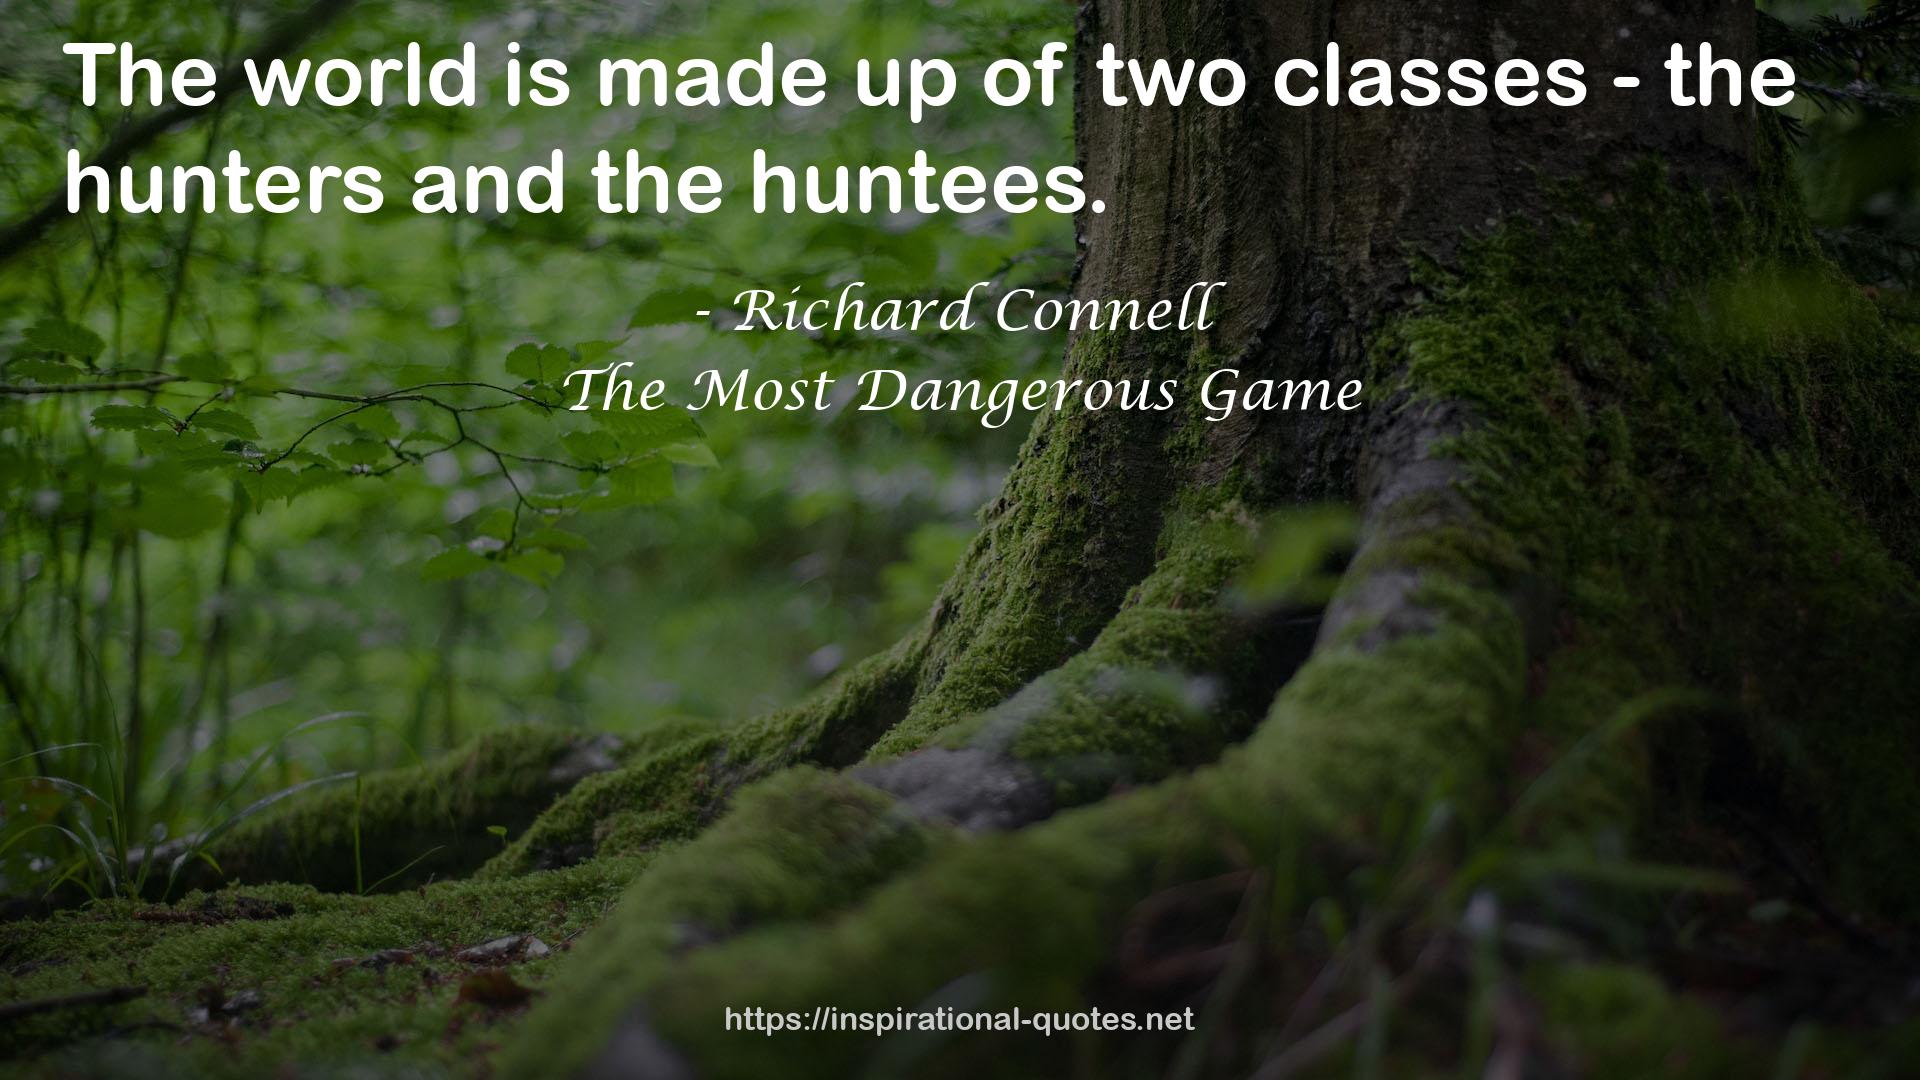 The Most Dangerous Game QUOTES